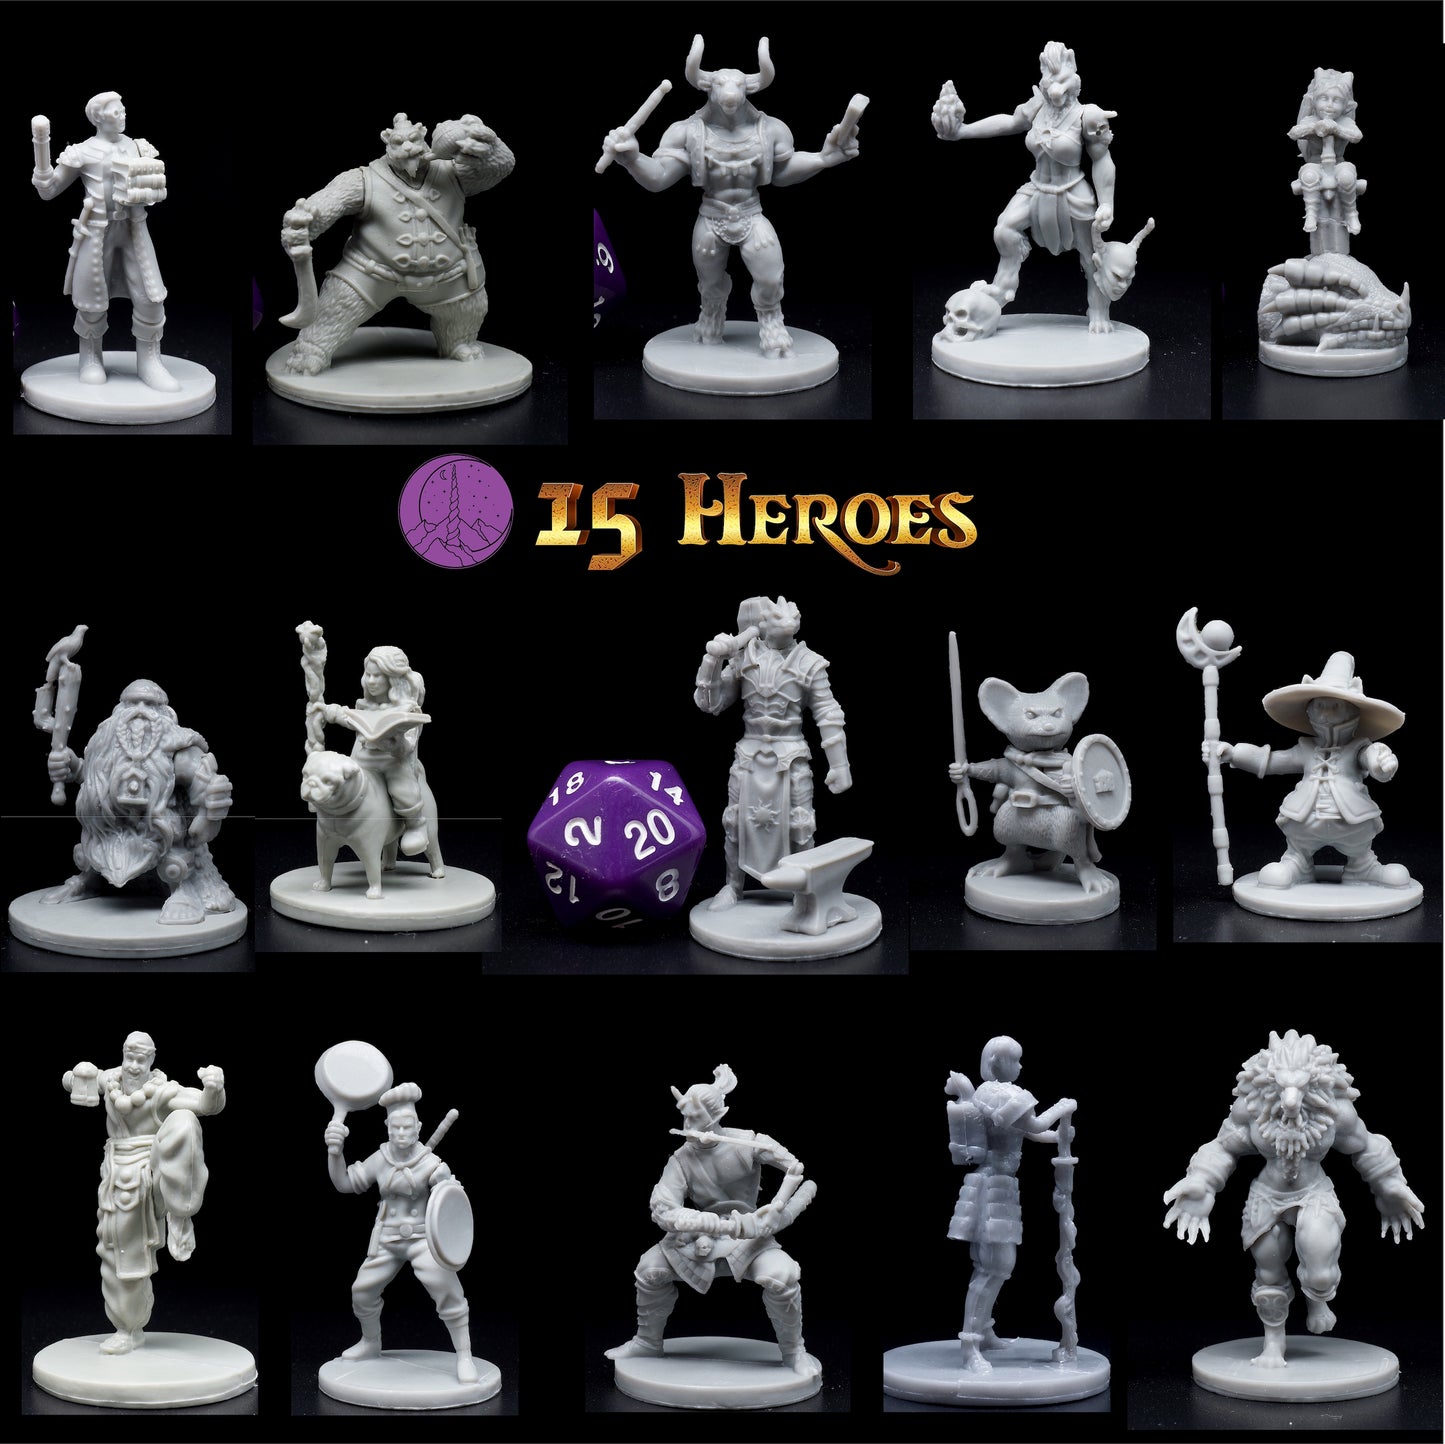 Heroes & NPC Characters Set for DND (28mm-32mm scale)